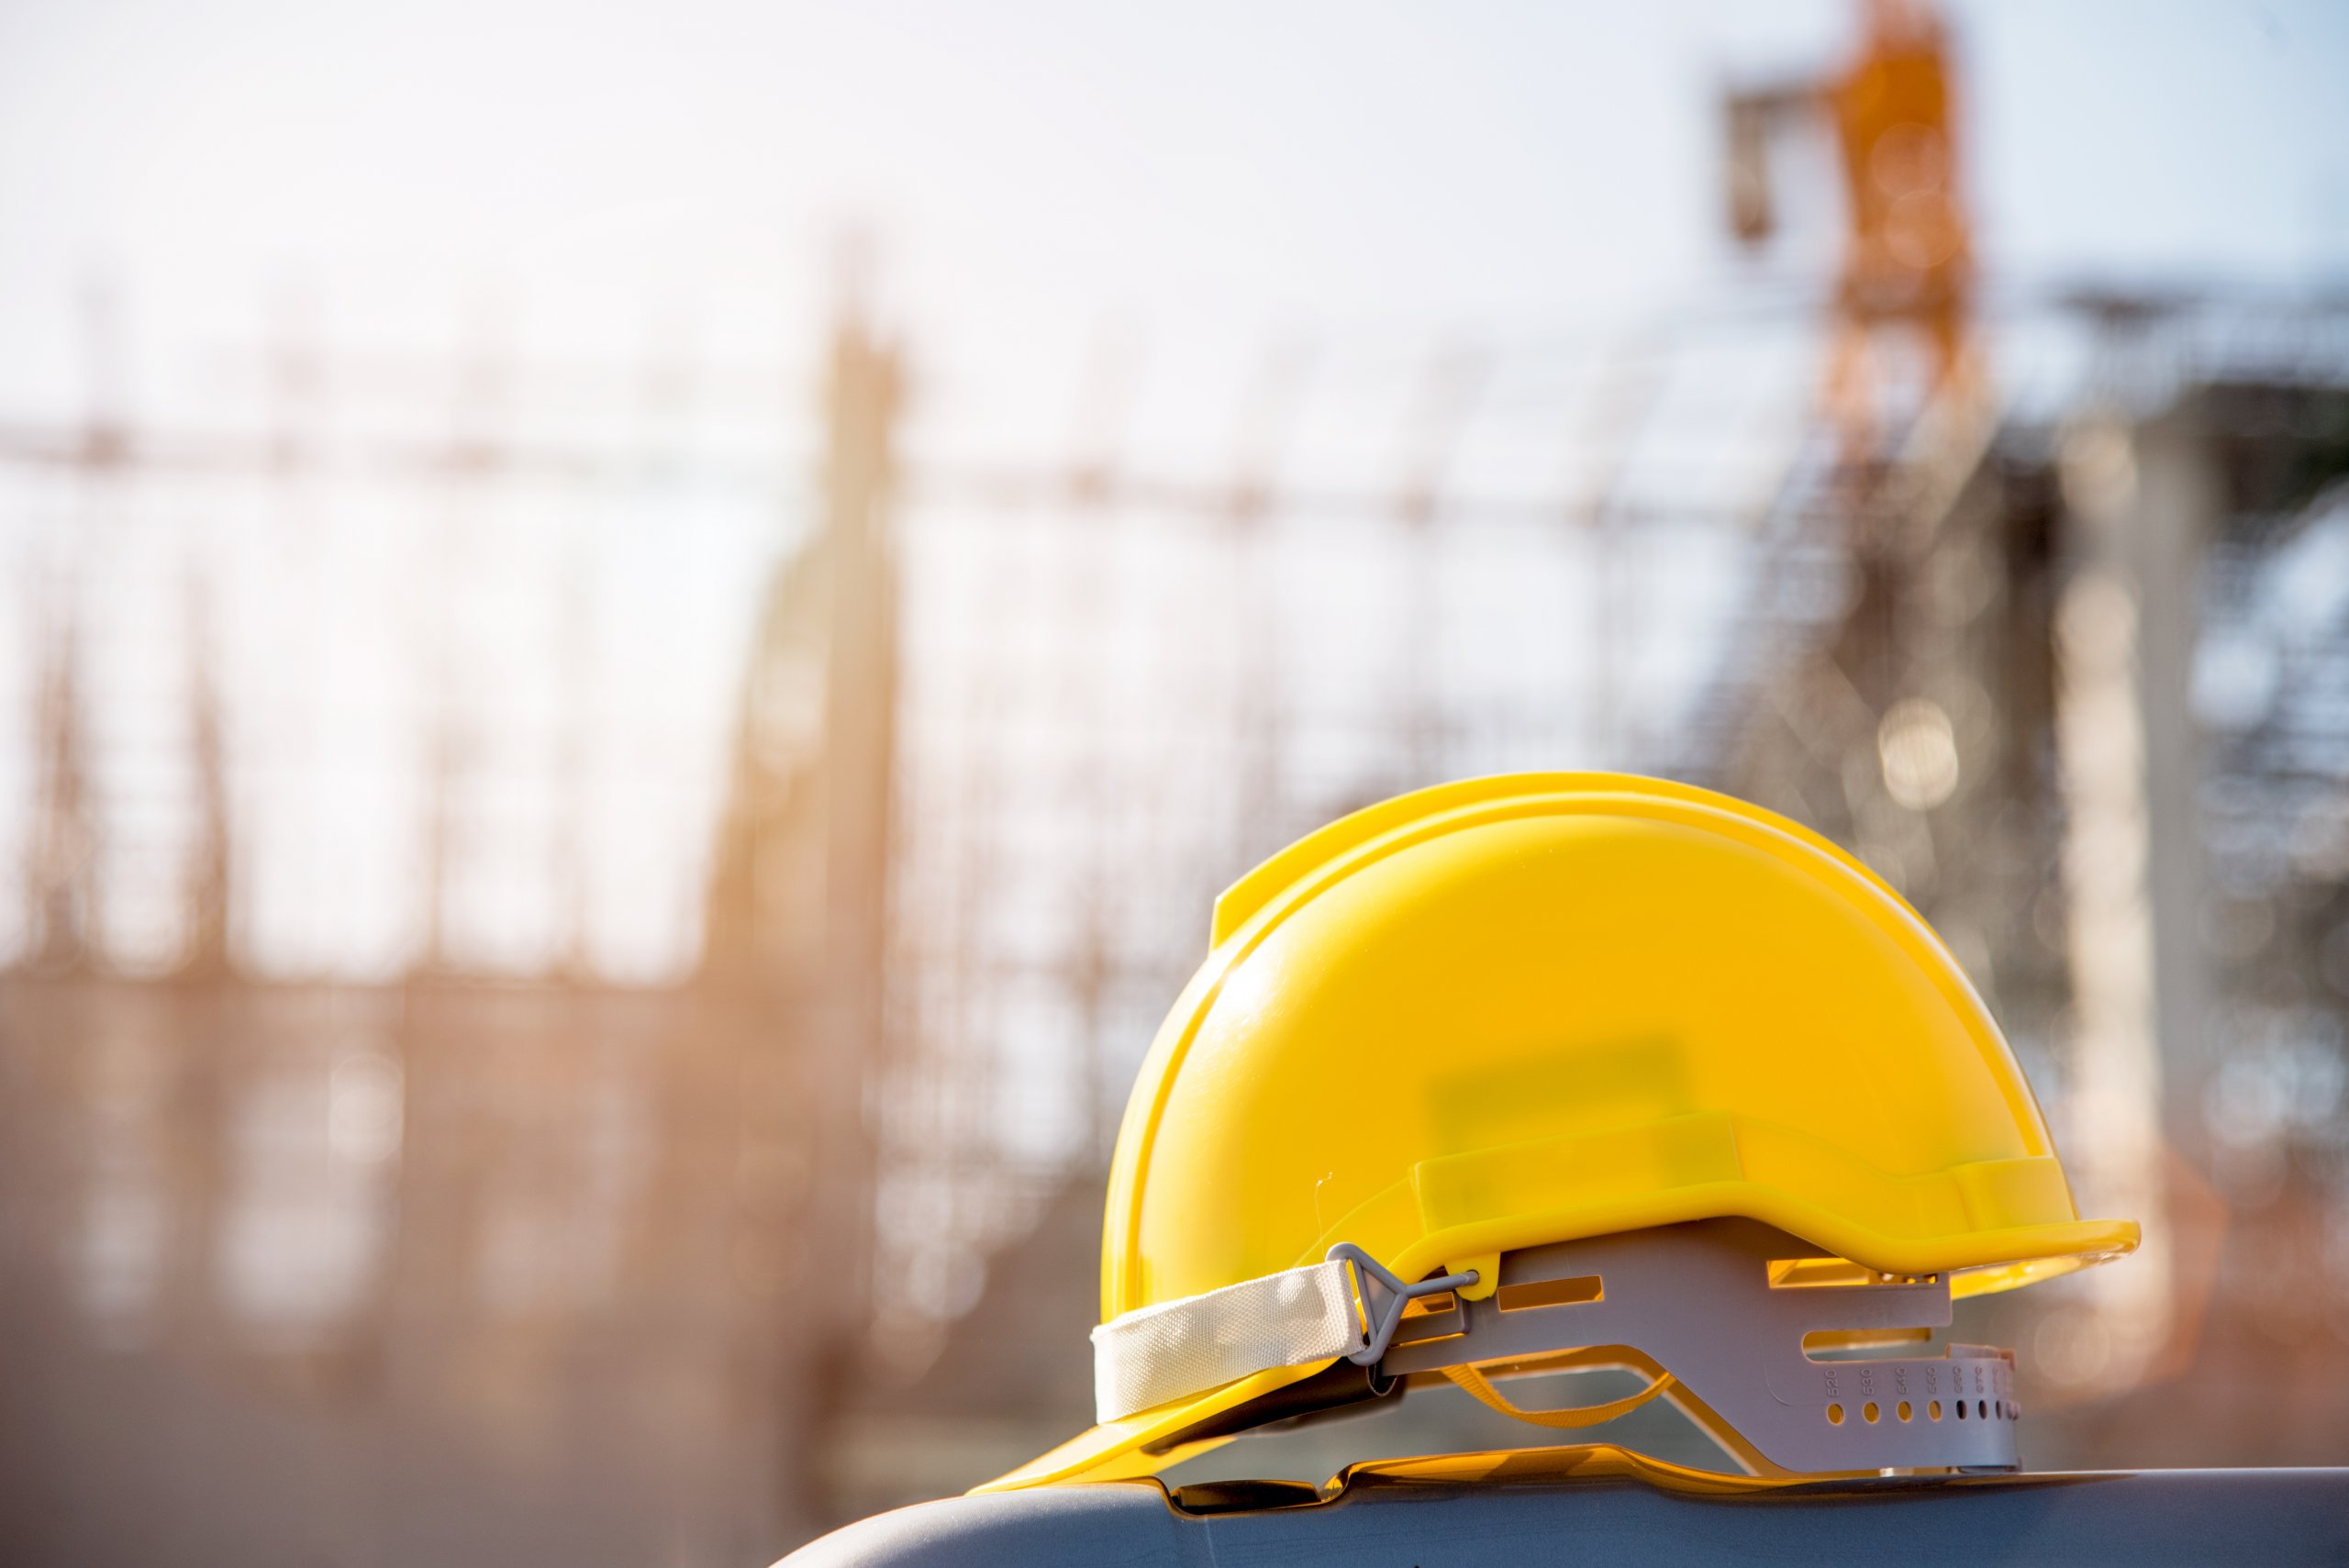 Common Scaffolding Safety Mistakes and How to Avoid Them – Ensure Construction Site Safety